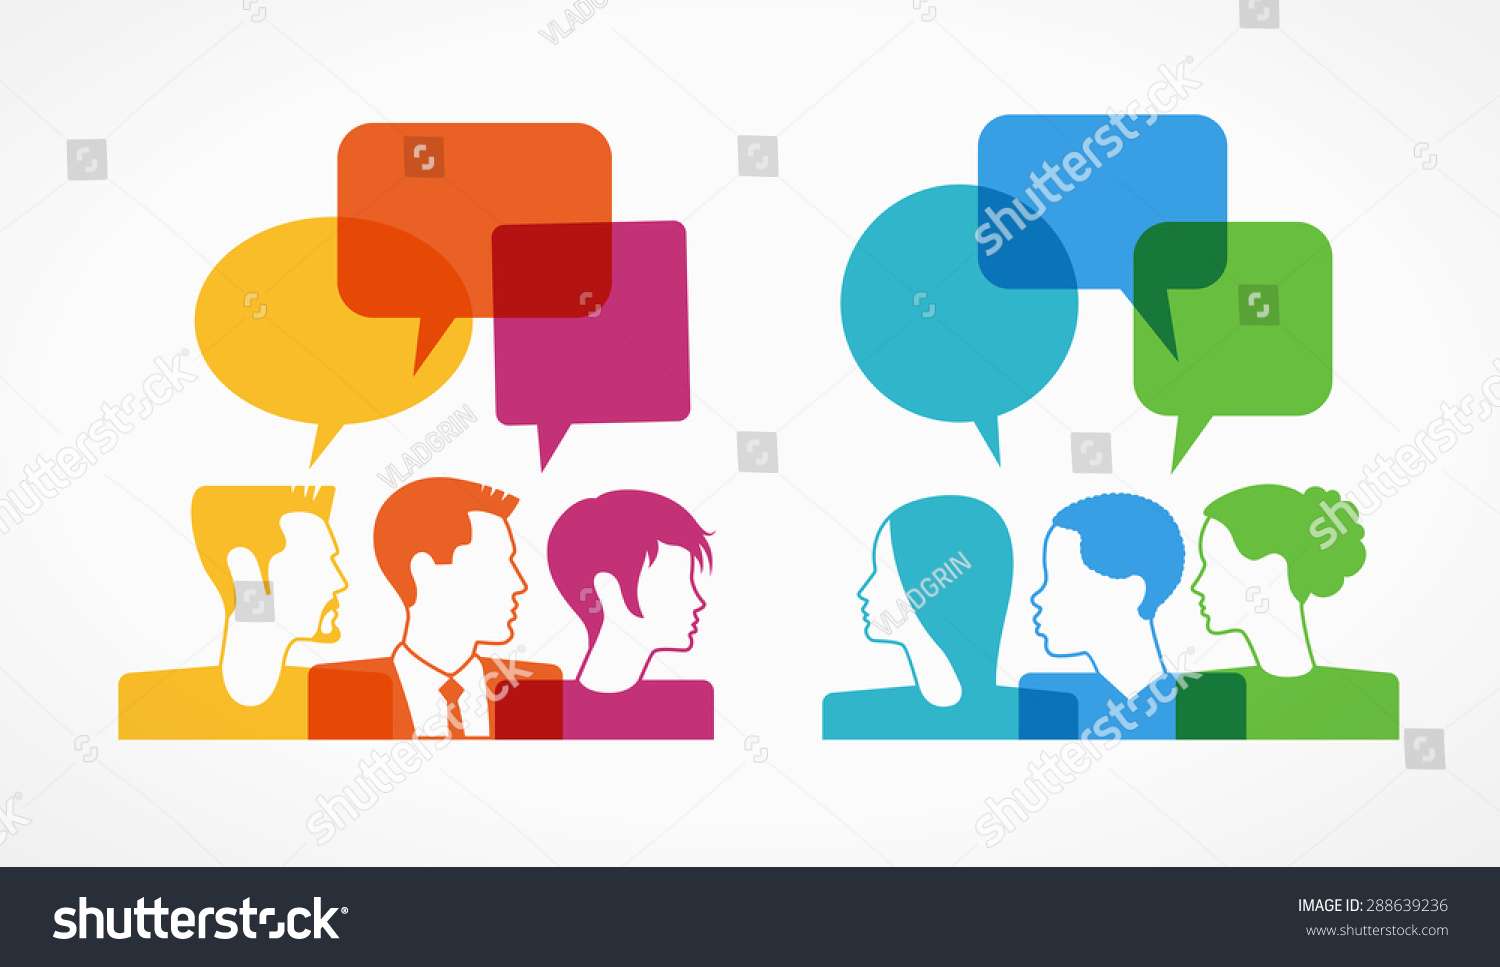 SVG of people icons with colorful dialog speech bubbles . This image contains transparency.   svg